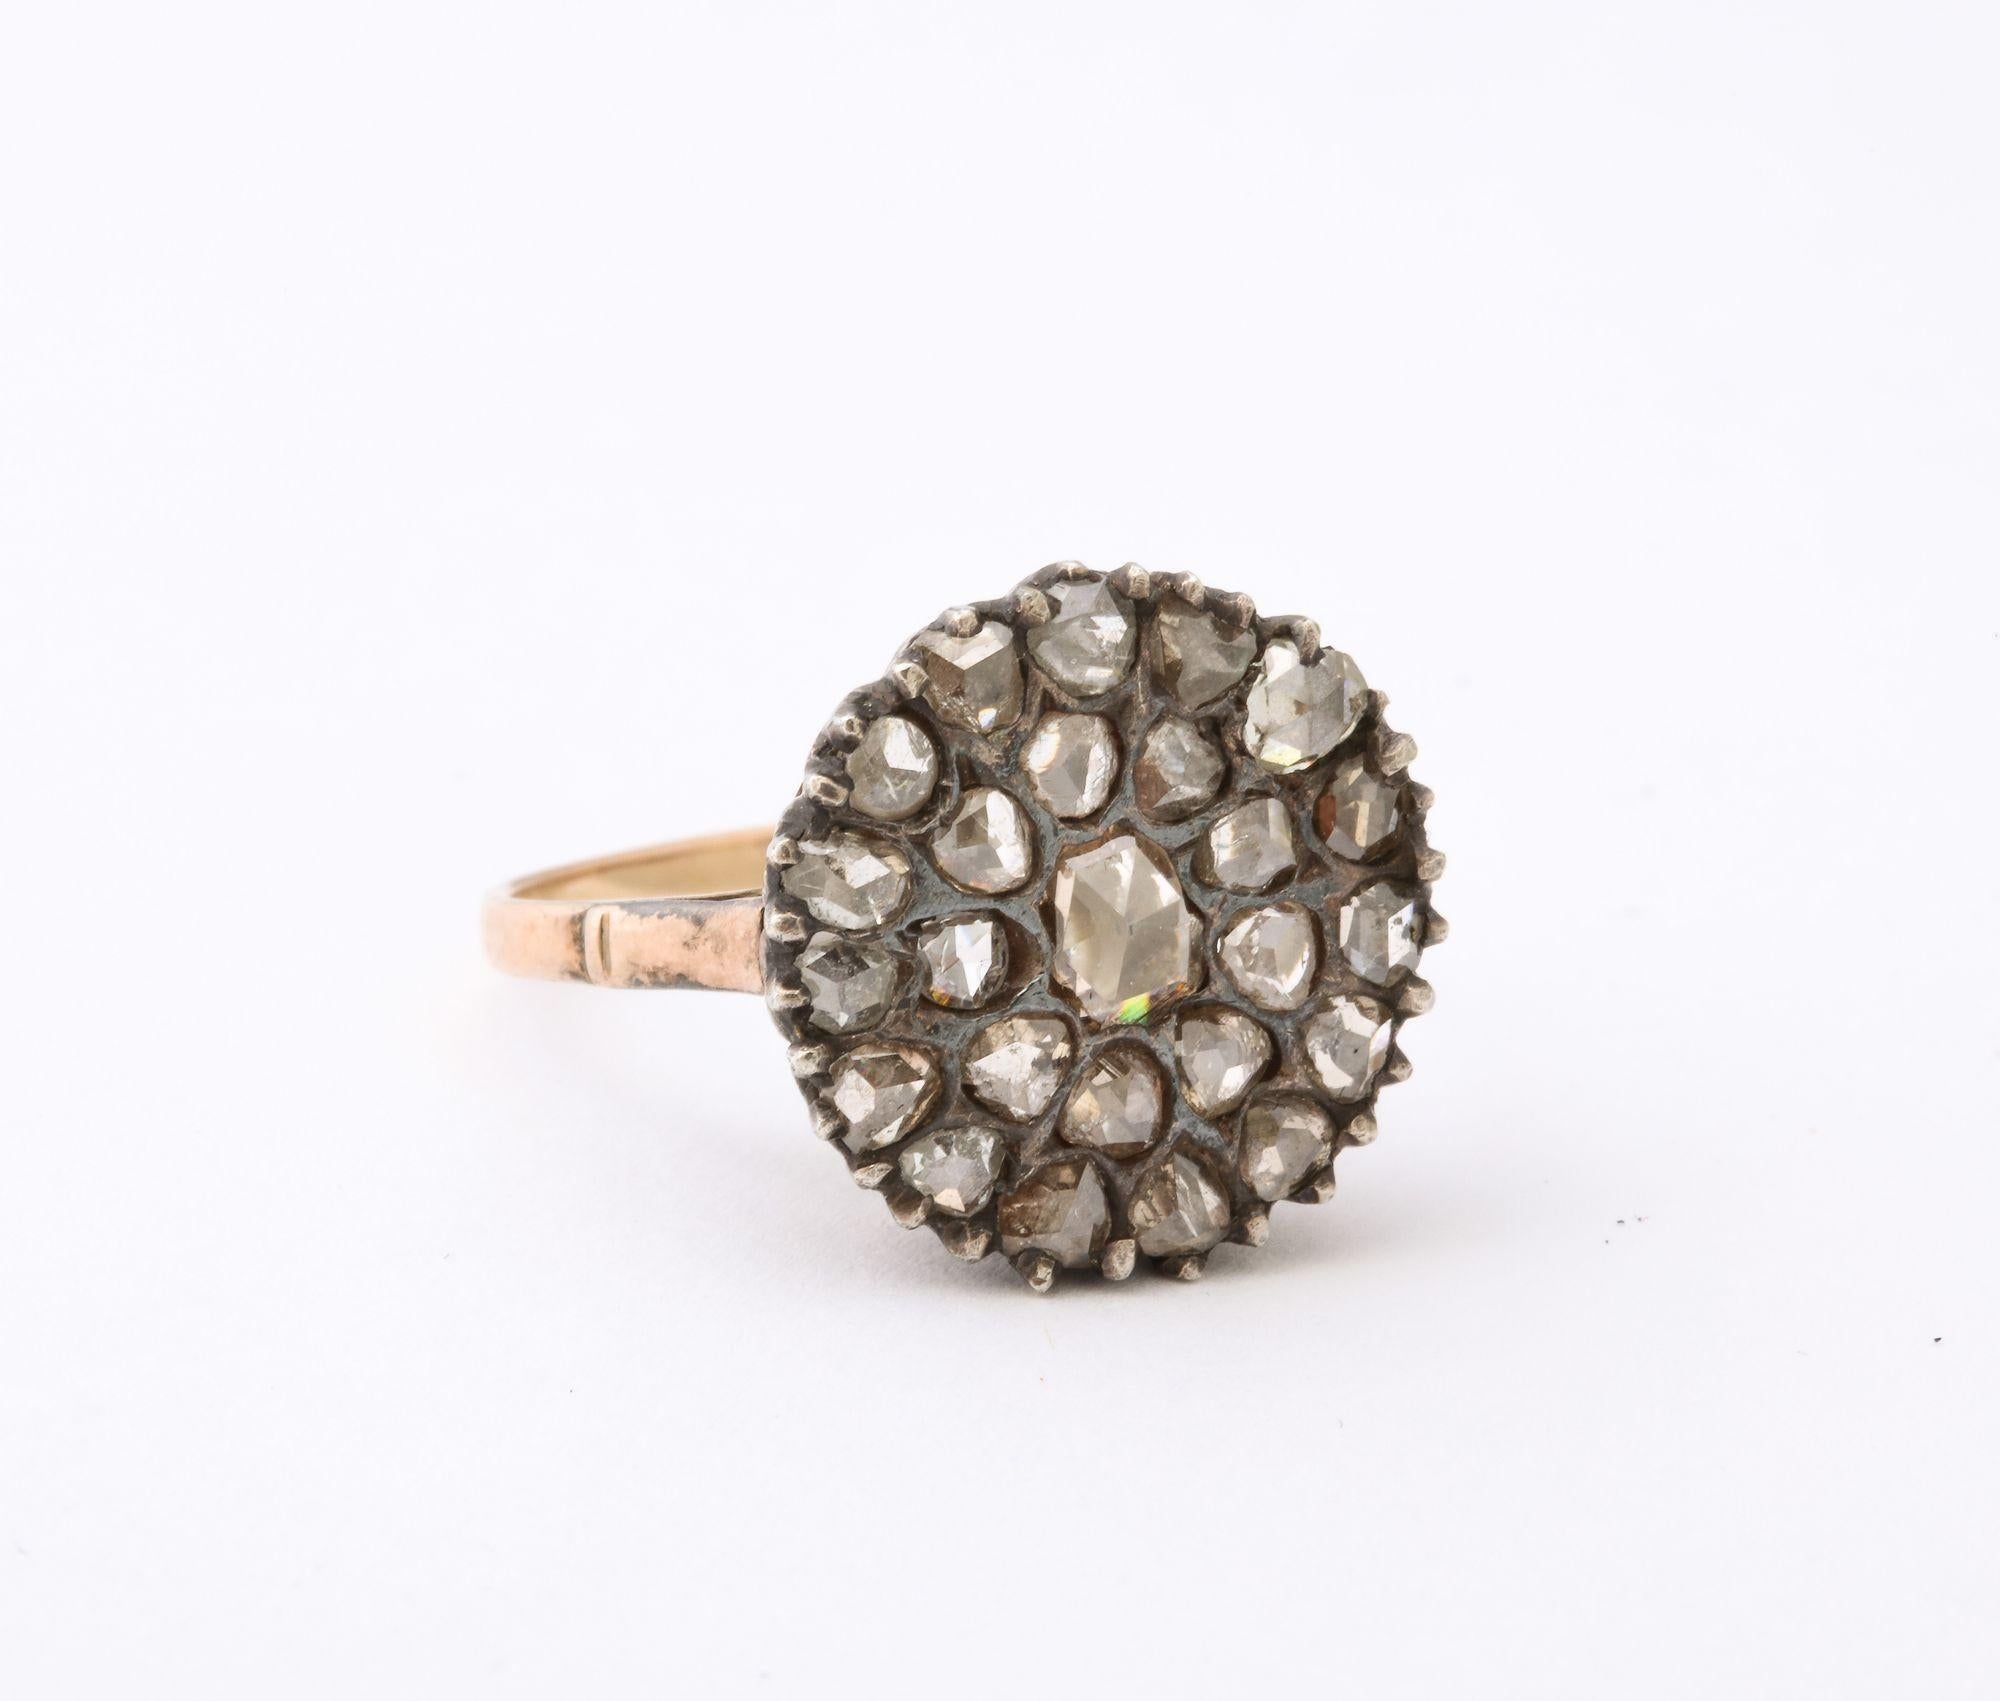 Antique Rose Diamond and Gold Ring. A classic period antique ring with a central rose diamond surrounded by a cluster of smaller rose diamonds on a 10K Gold mount. Approx 1.5 carat weight. Color K-M